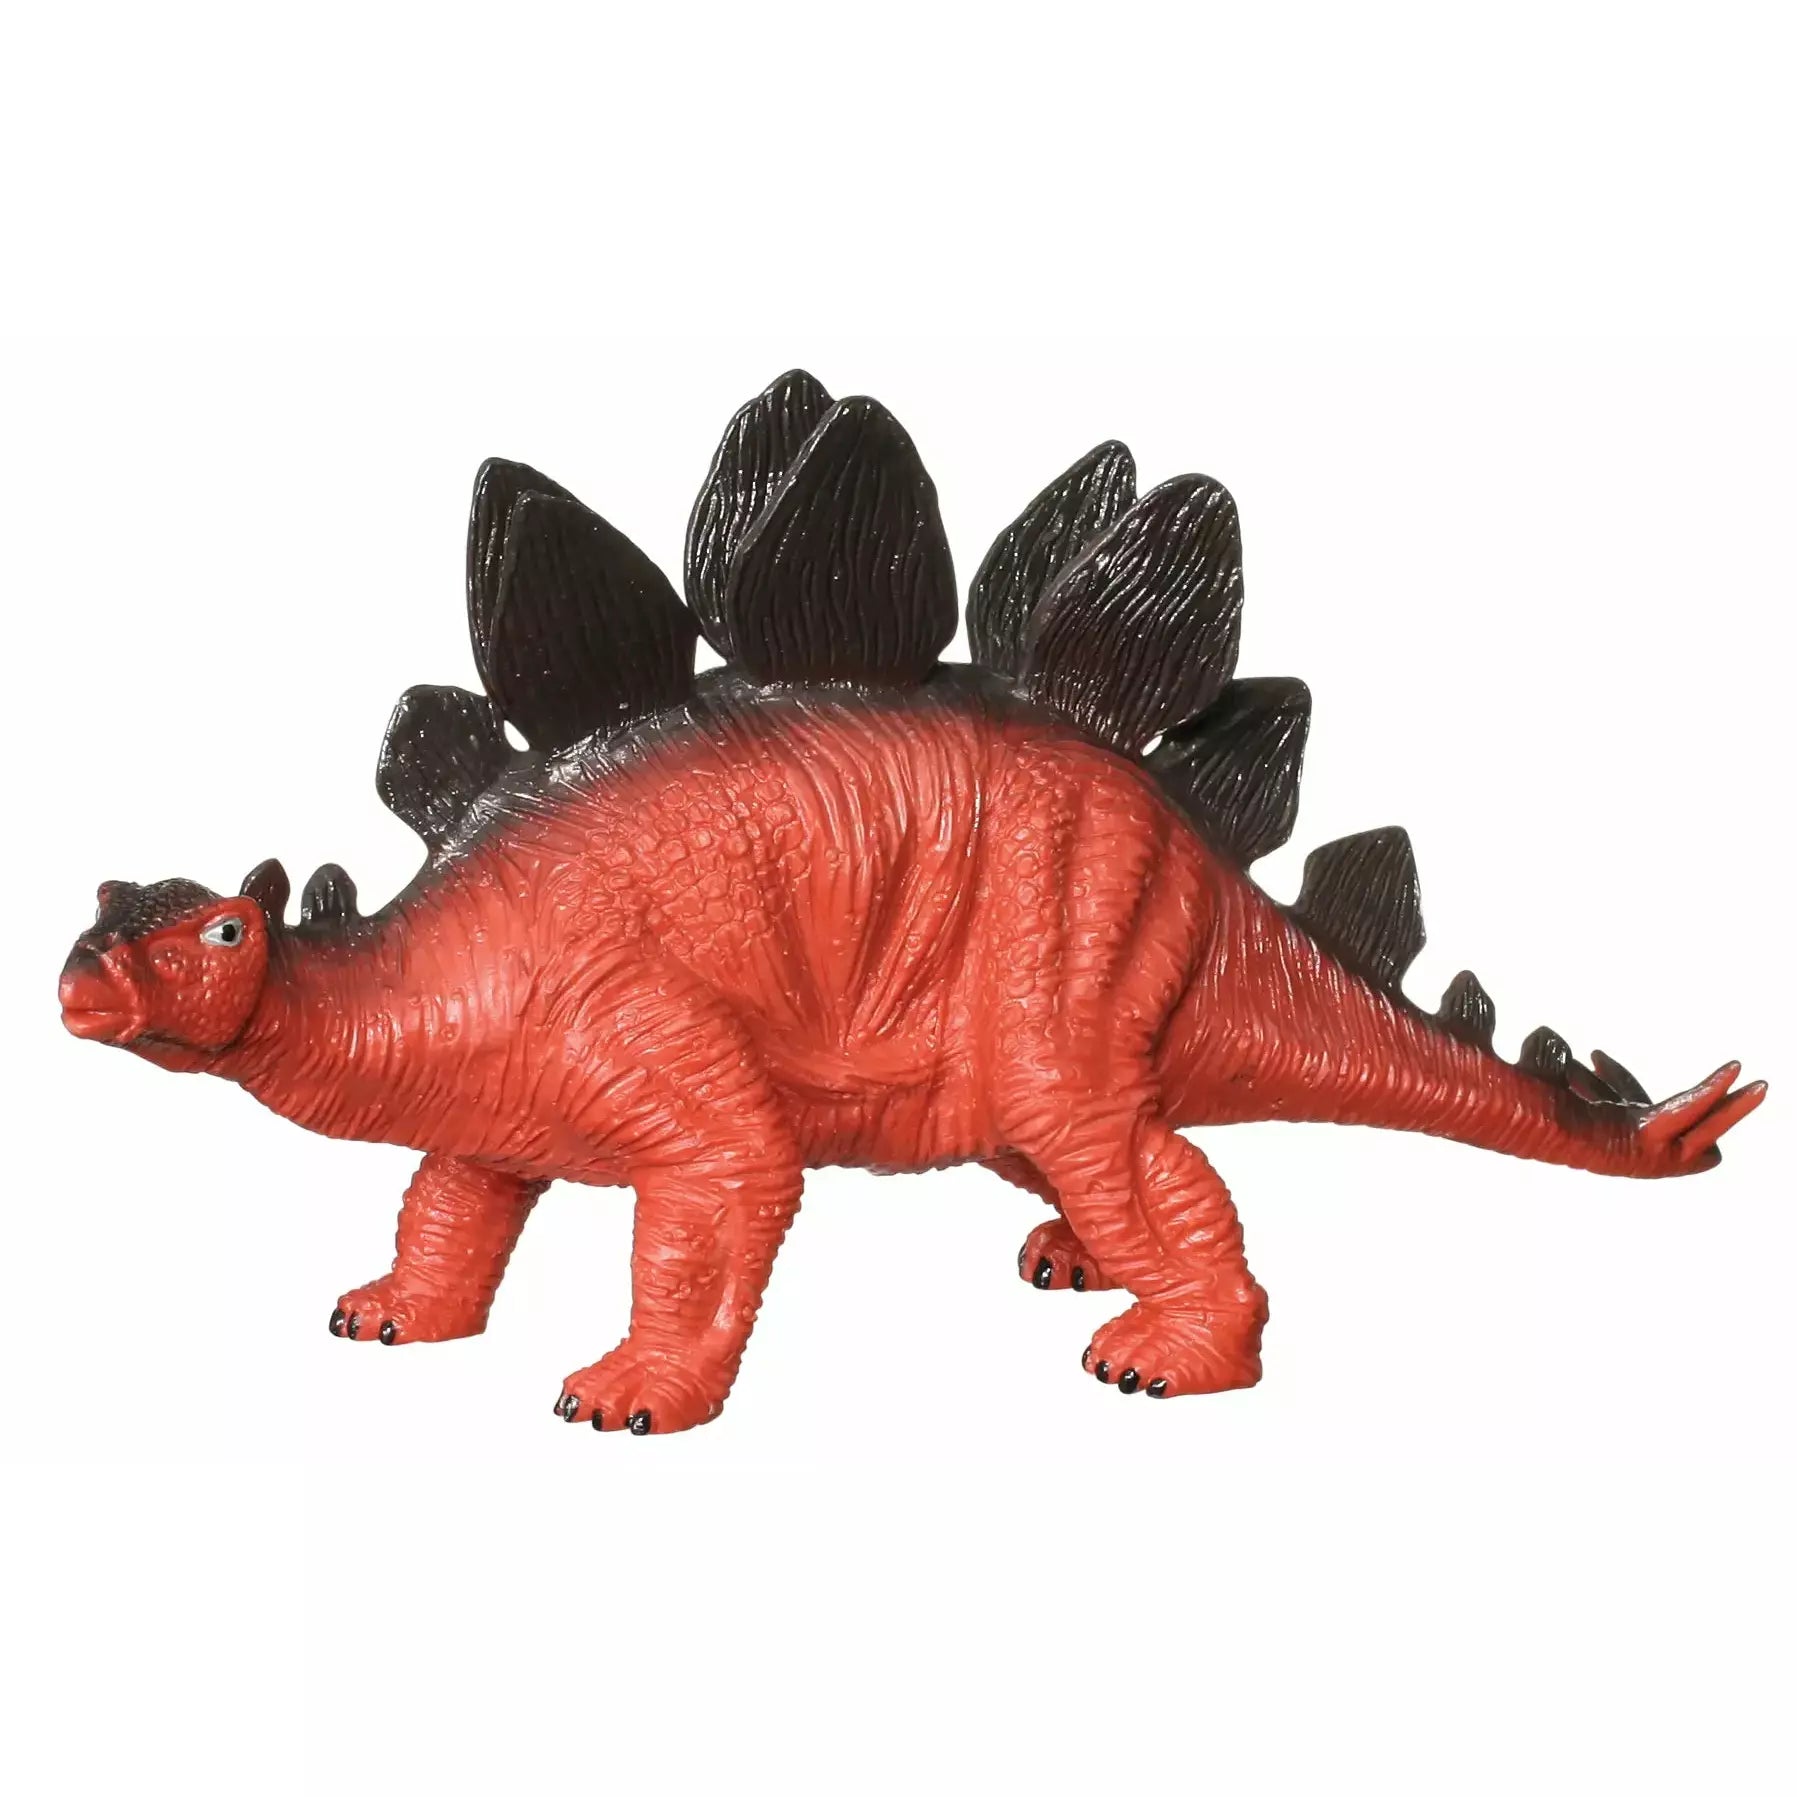 Large Dinosaurs, 8 to 12 inch - 0